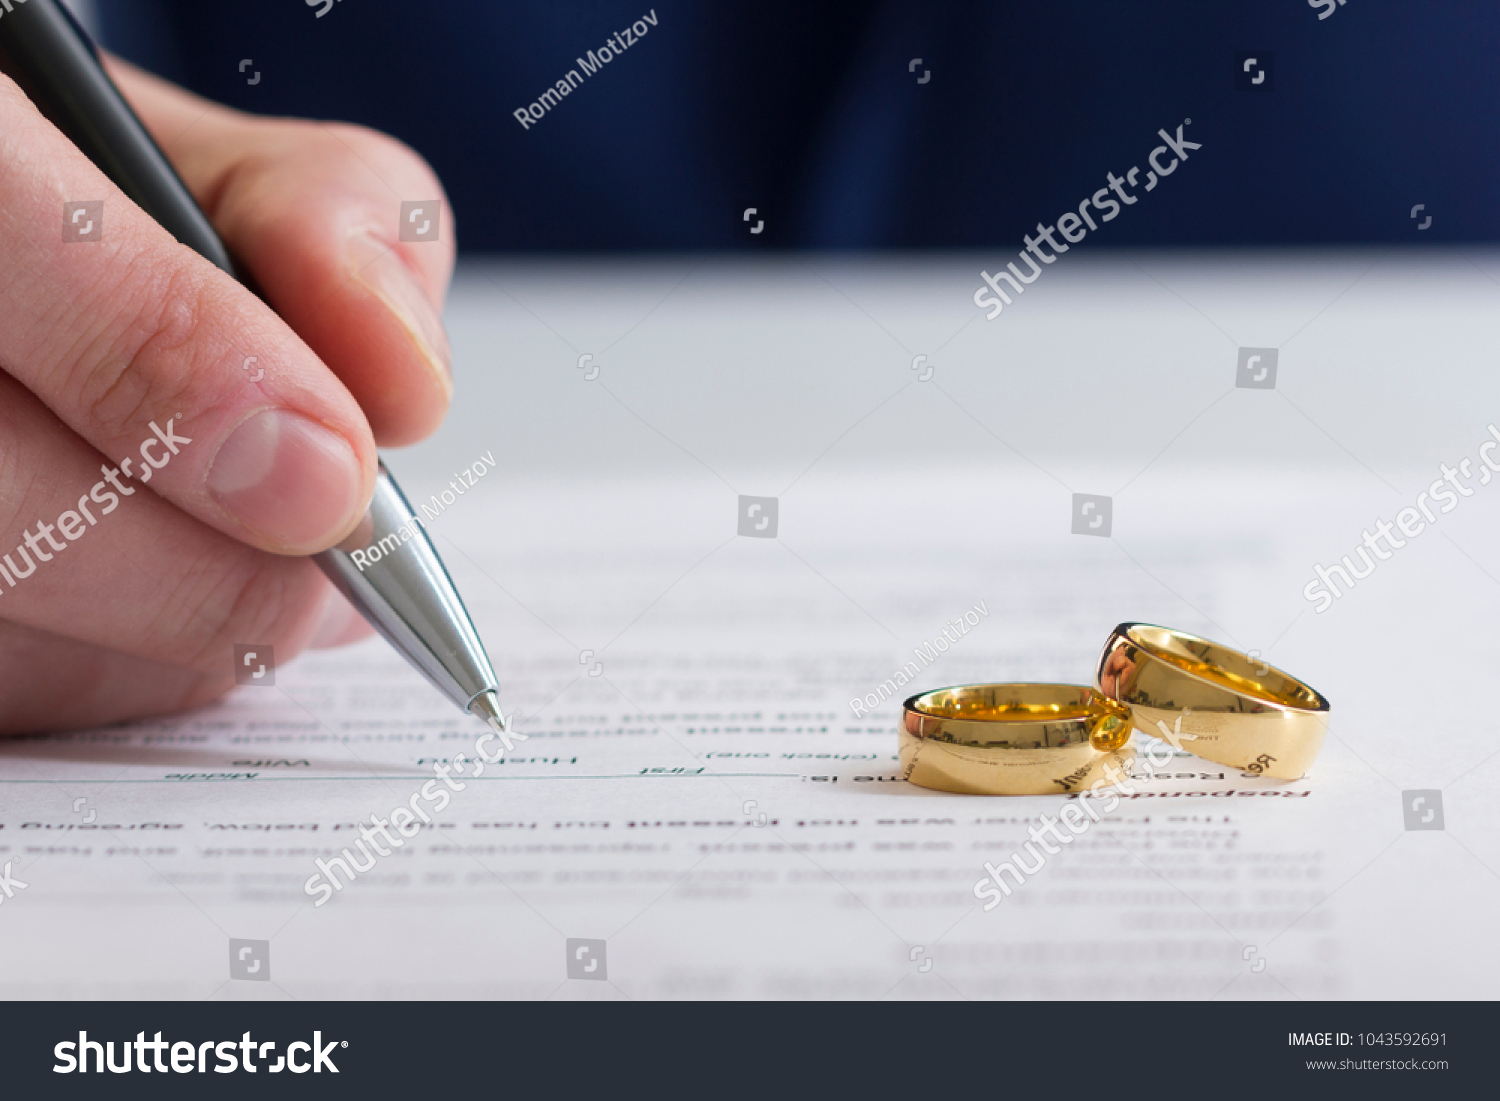 Hands of wife, husband signing decree of divorce, dissolution, canceling marriage, legal separation documents, filing divorce papers or premarital agreement prepared by lawyer. Wedding ring #1043592691